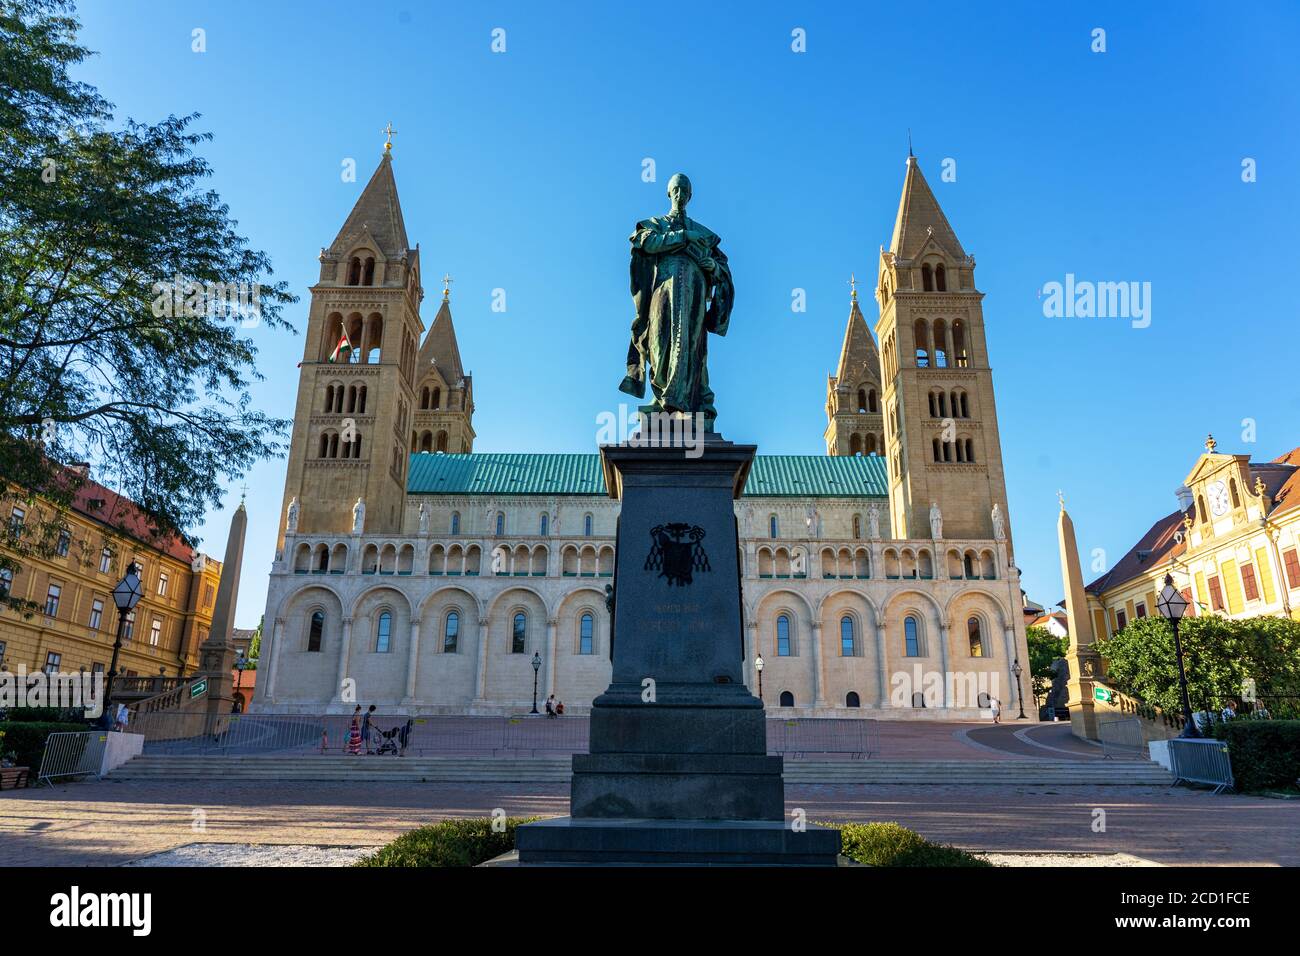 Statue of Ignac Szepesy and Basilica of St. Peter & St. Paul, Pecs Cathedral in Hungary the sign on the statue says Ignac Szepesy bishop Stock Photo